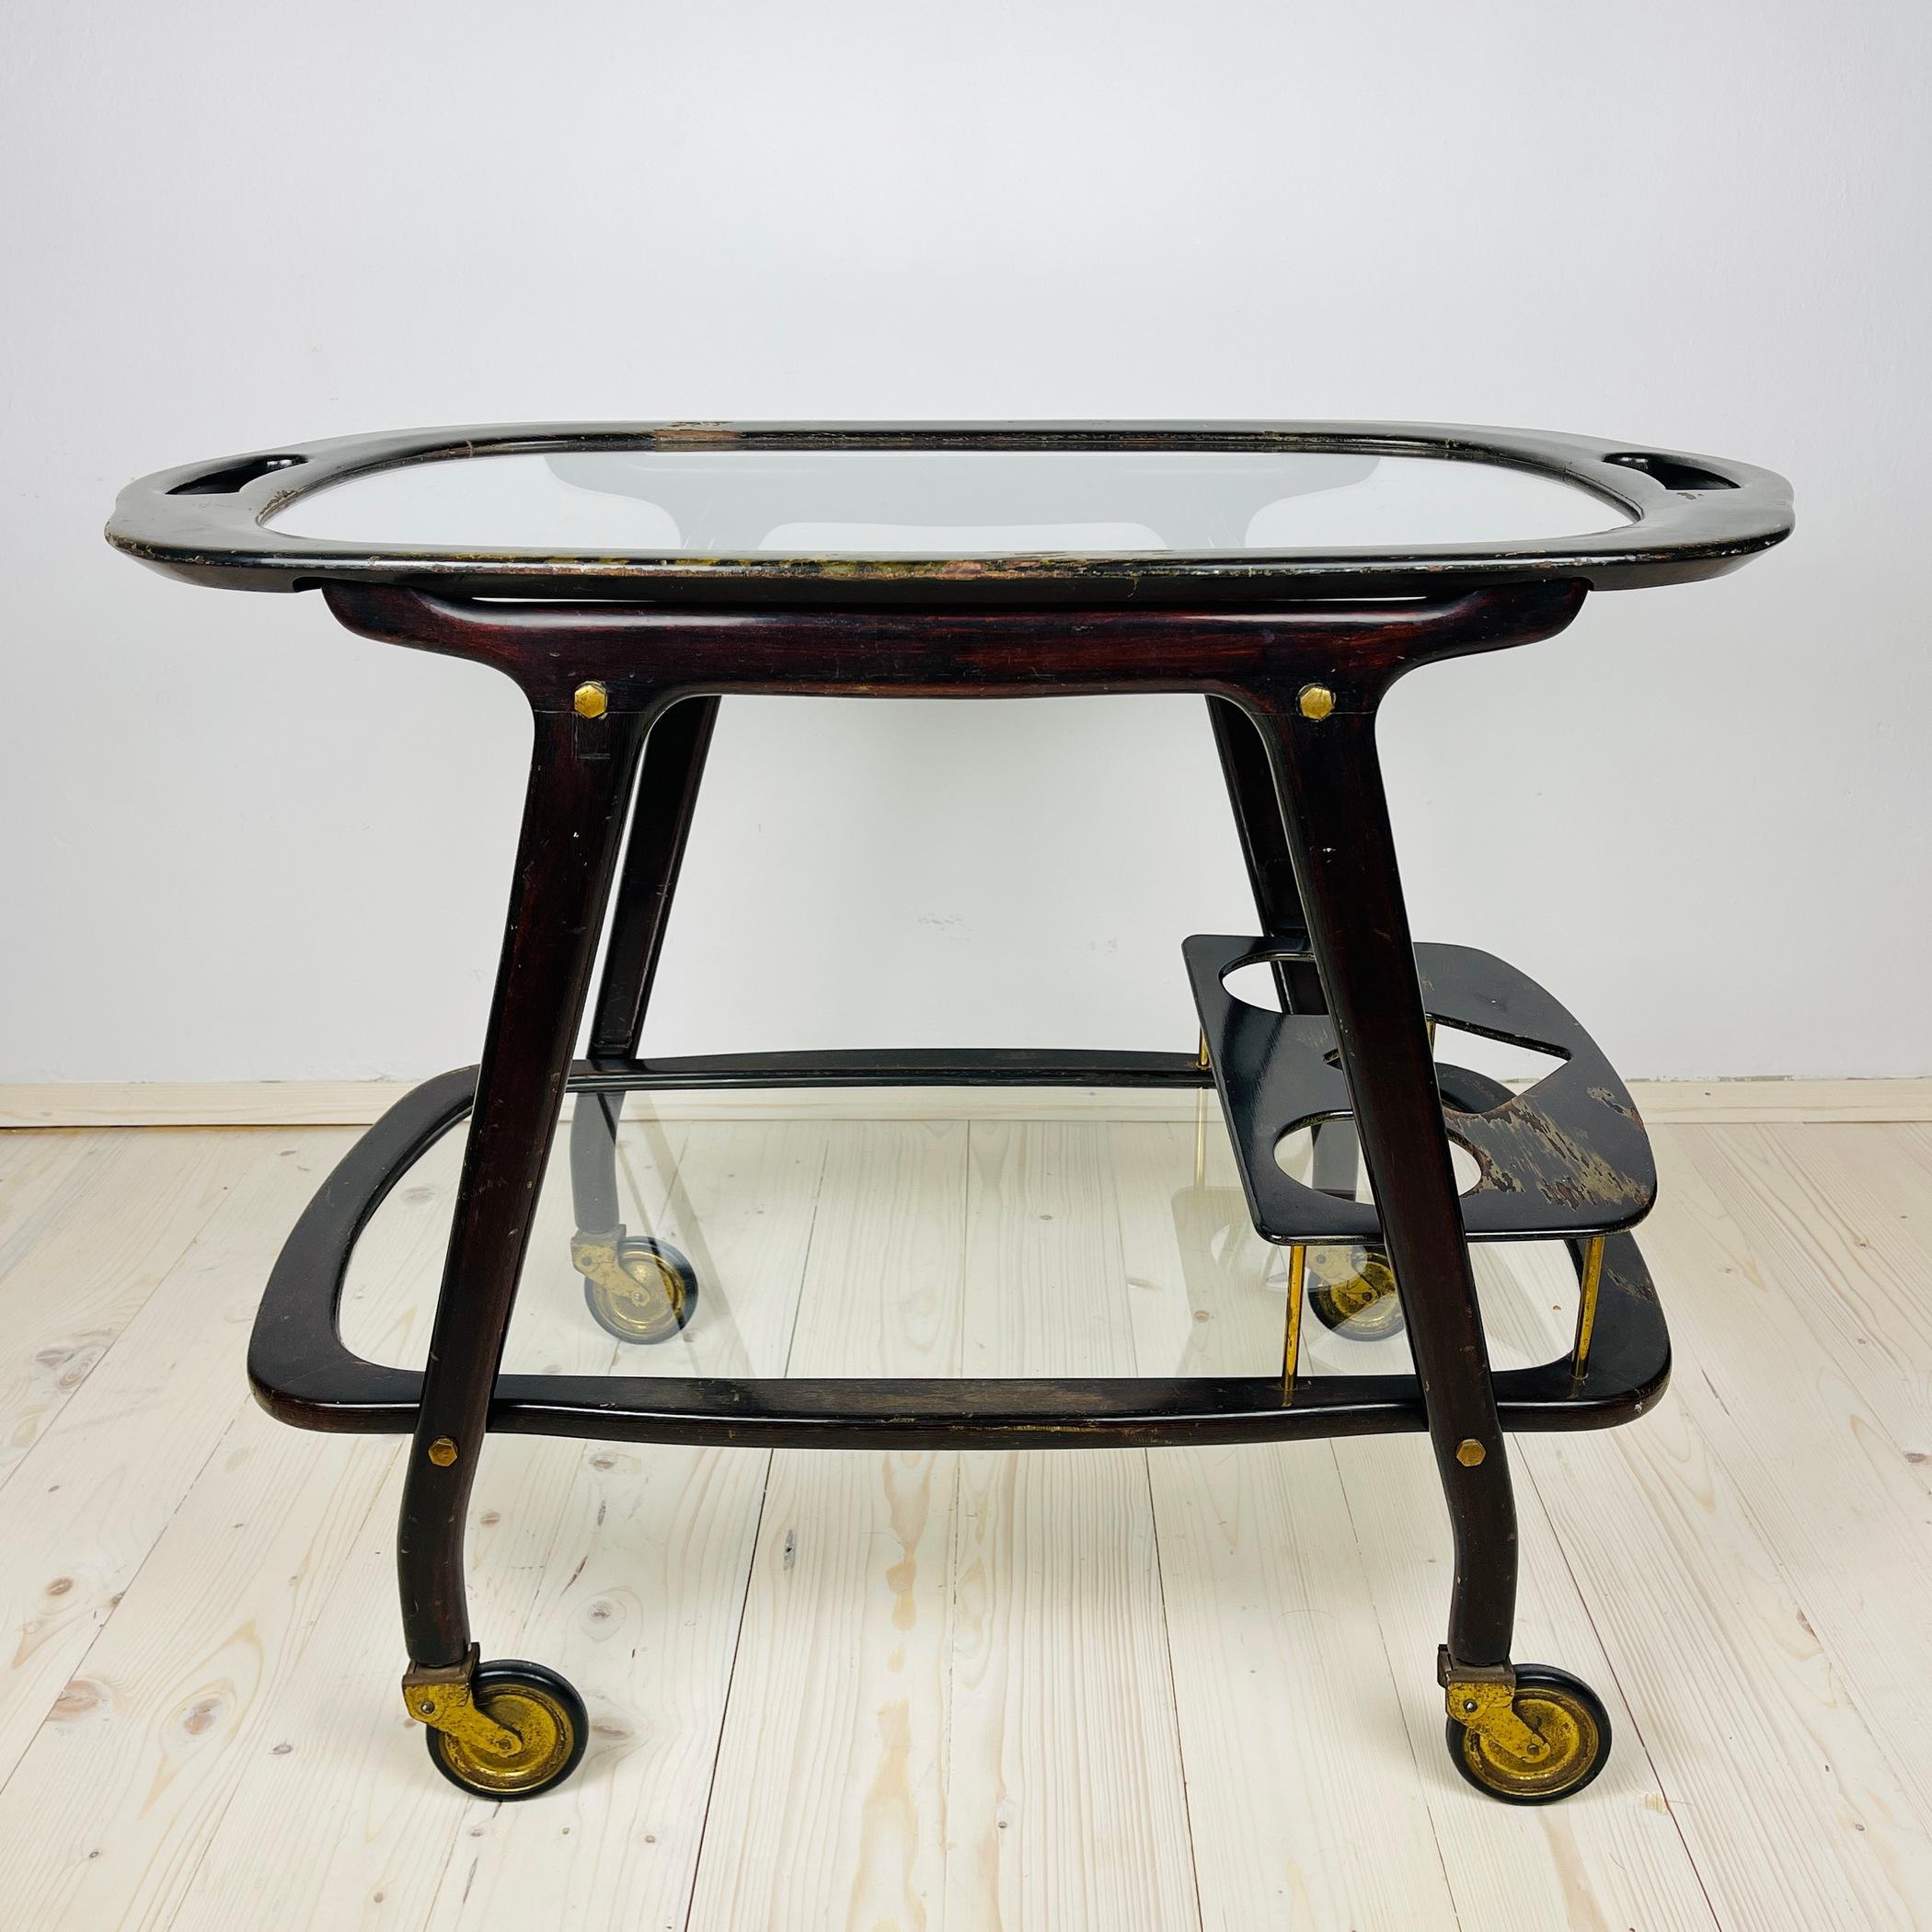 Wonderful Italian wooden trolley with glass and brass finishes. It has a removable serving tray. This item is by Italian designer Ico Parisi for De Baggis in the 1960s, has wonderful rounded lines. Ico Parisi is a talented Italian designer. His